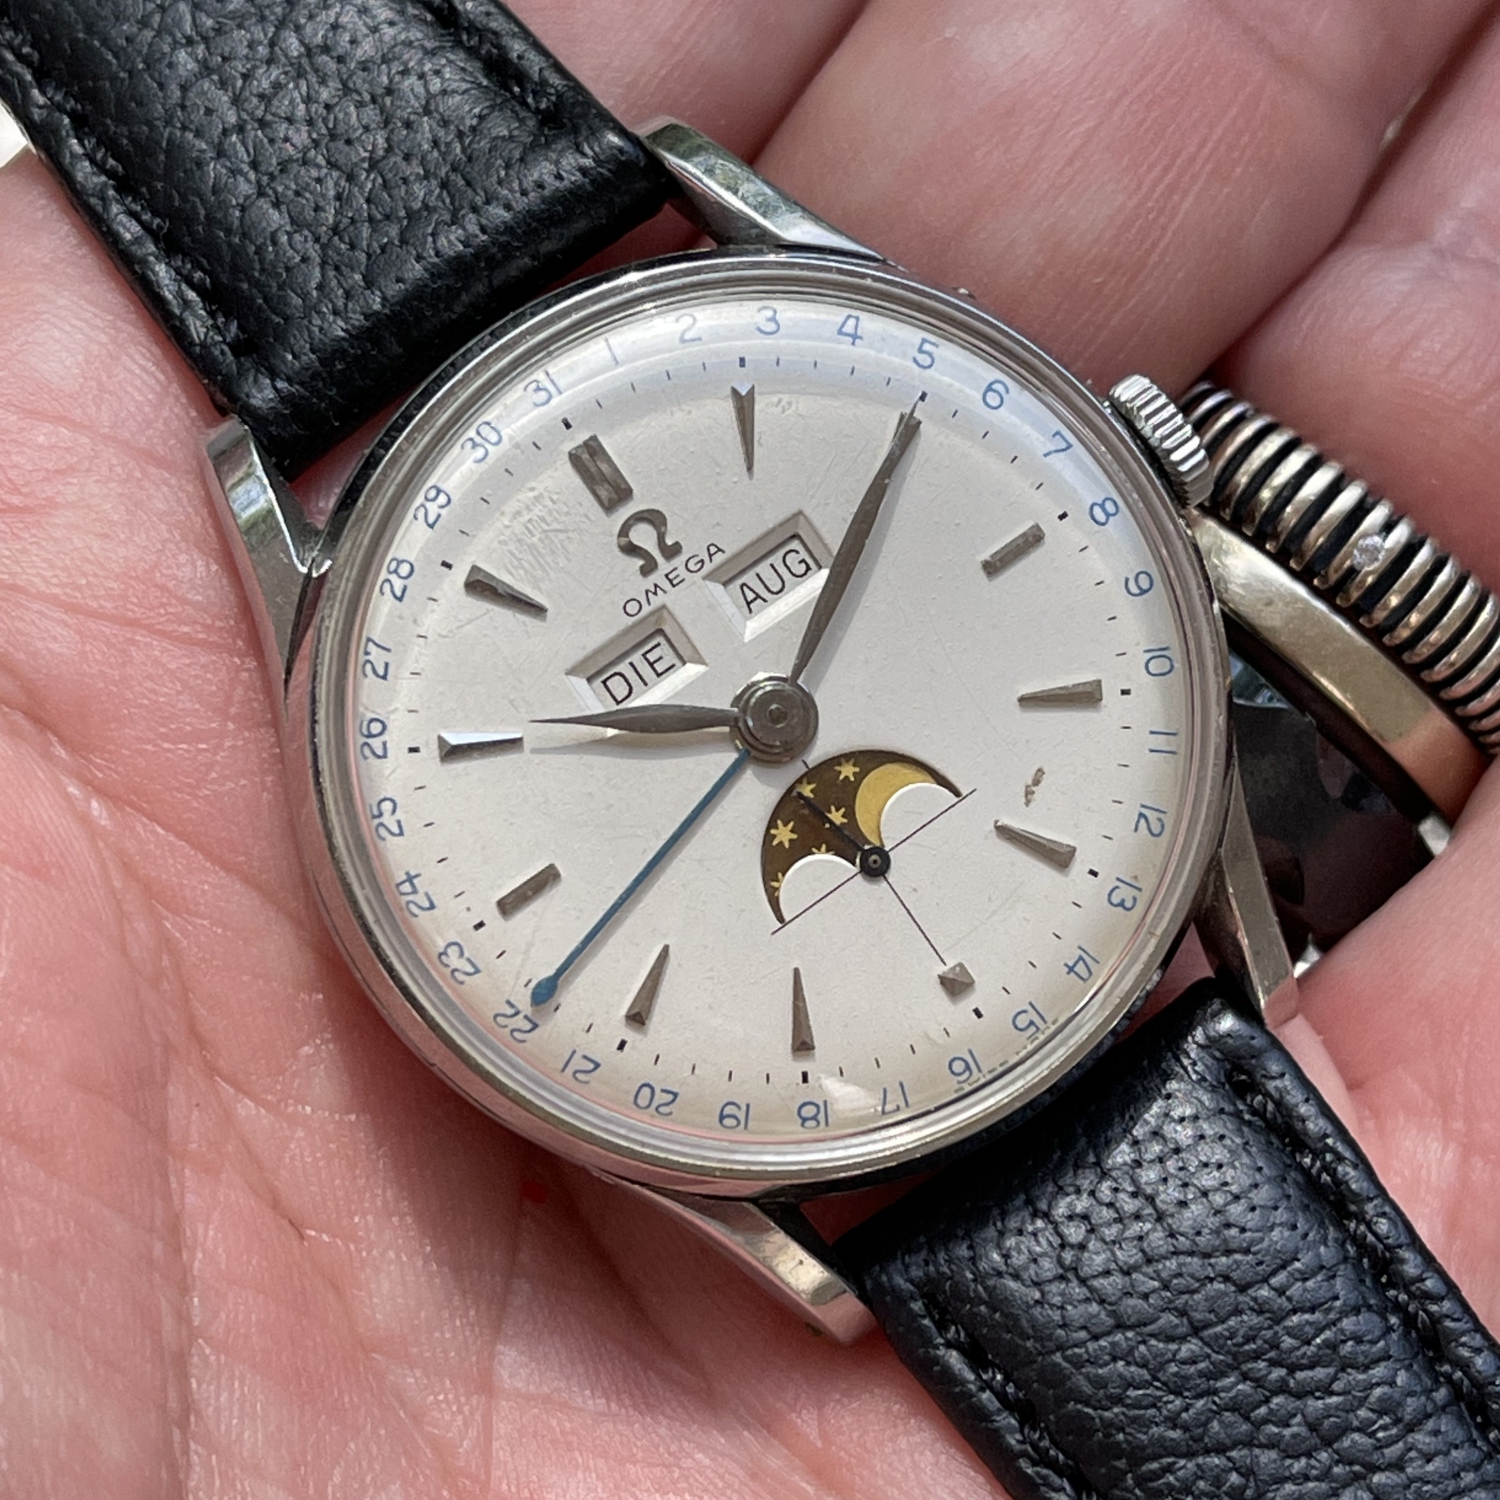 Vintage Watches and Cars - VWCWEB.COM